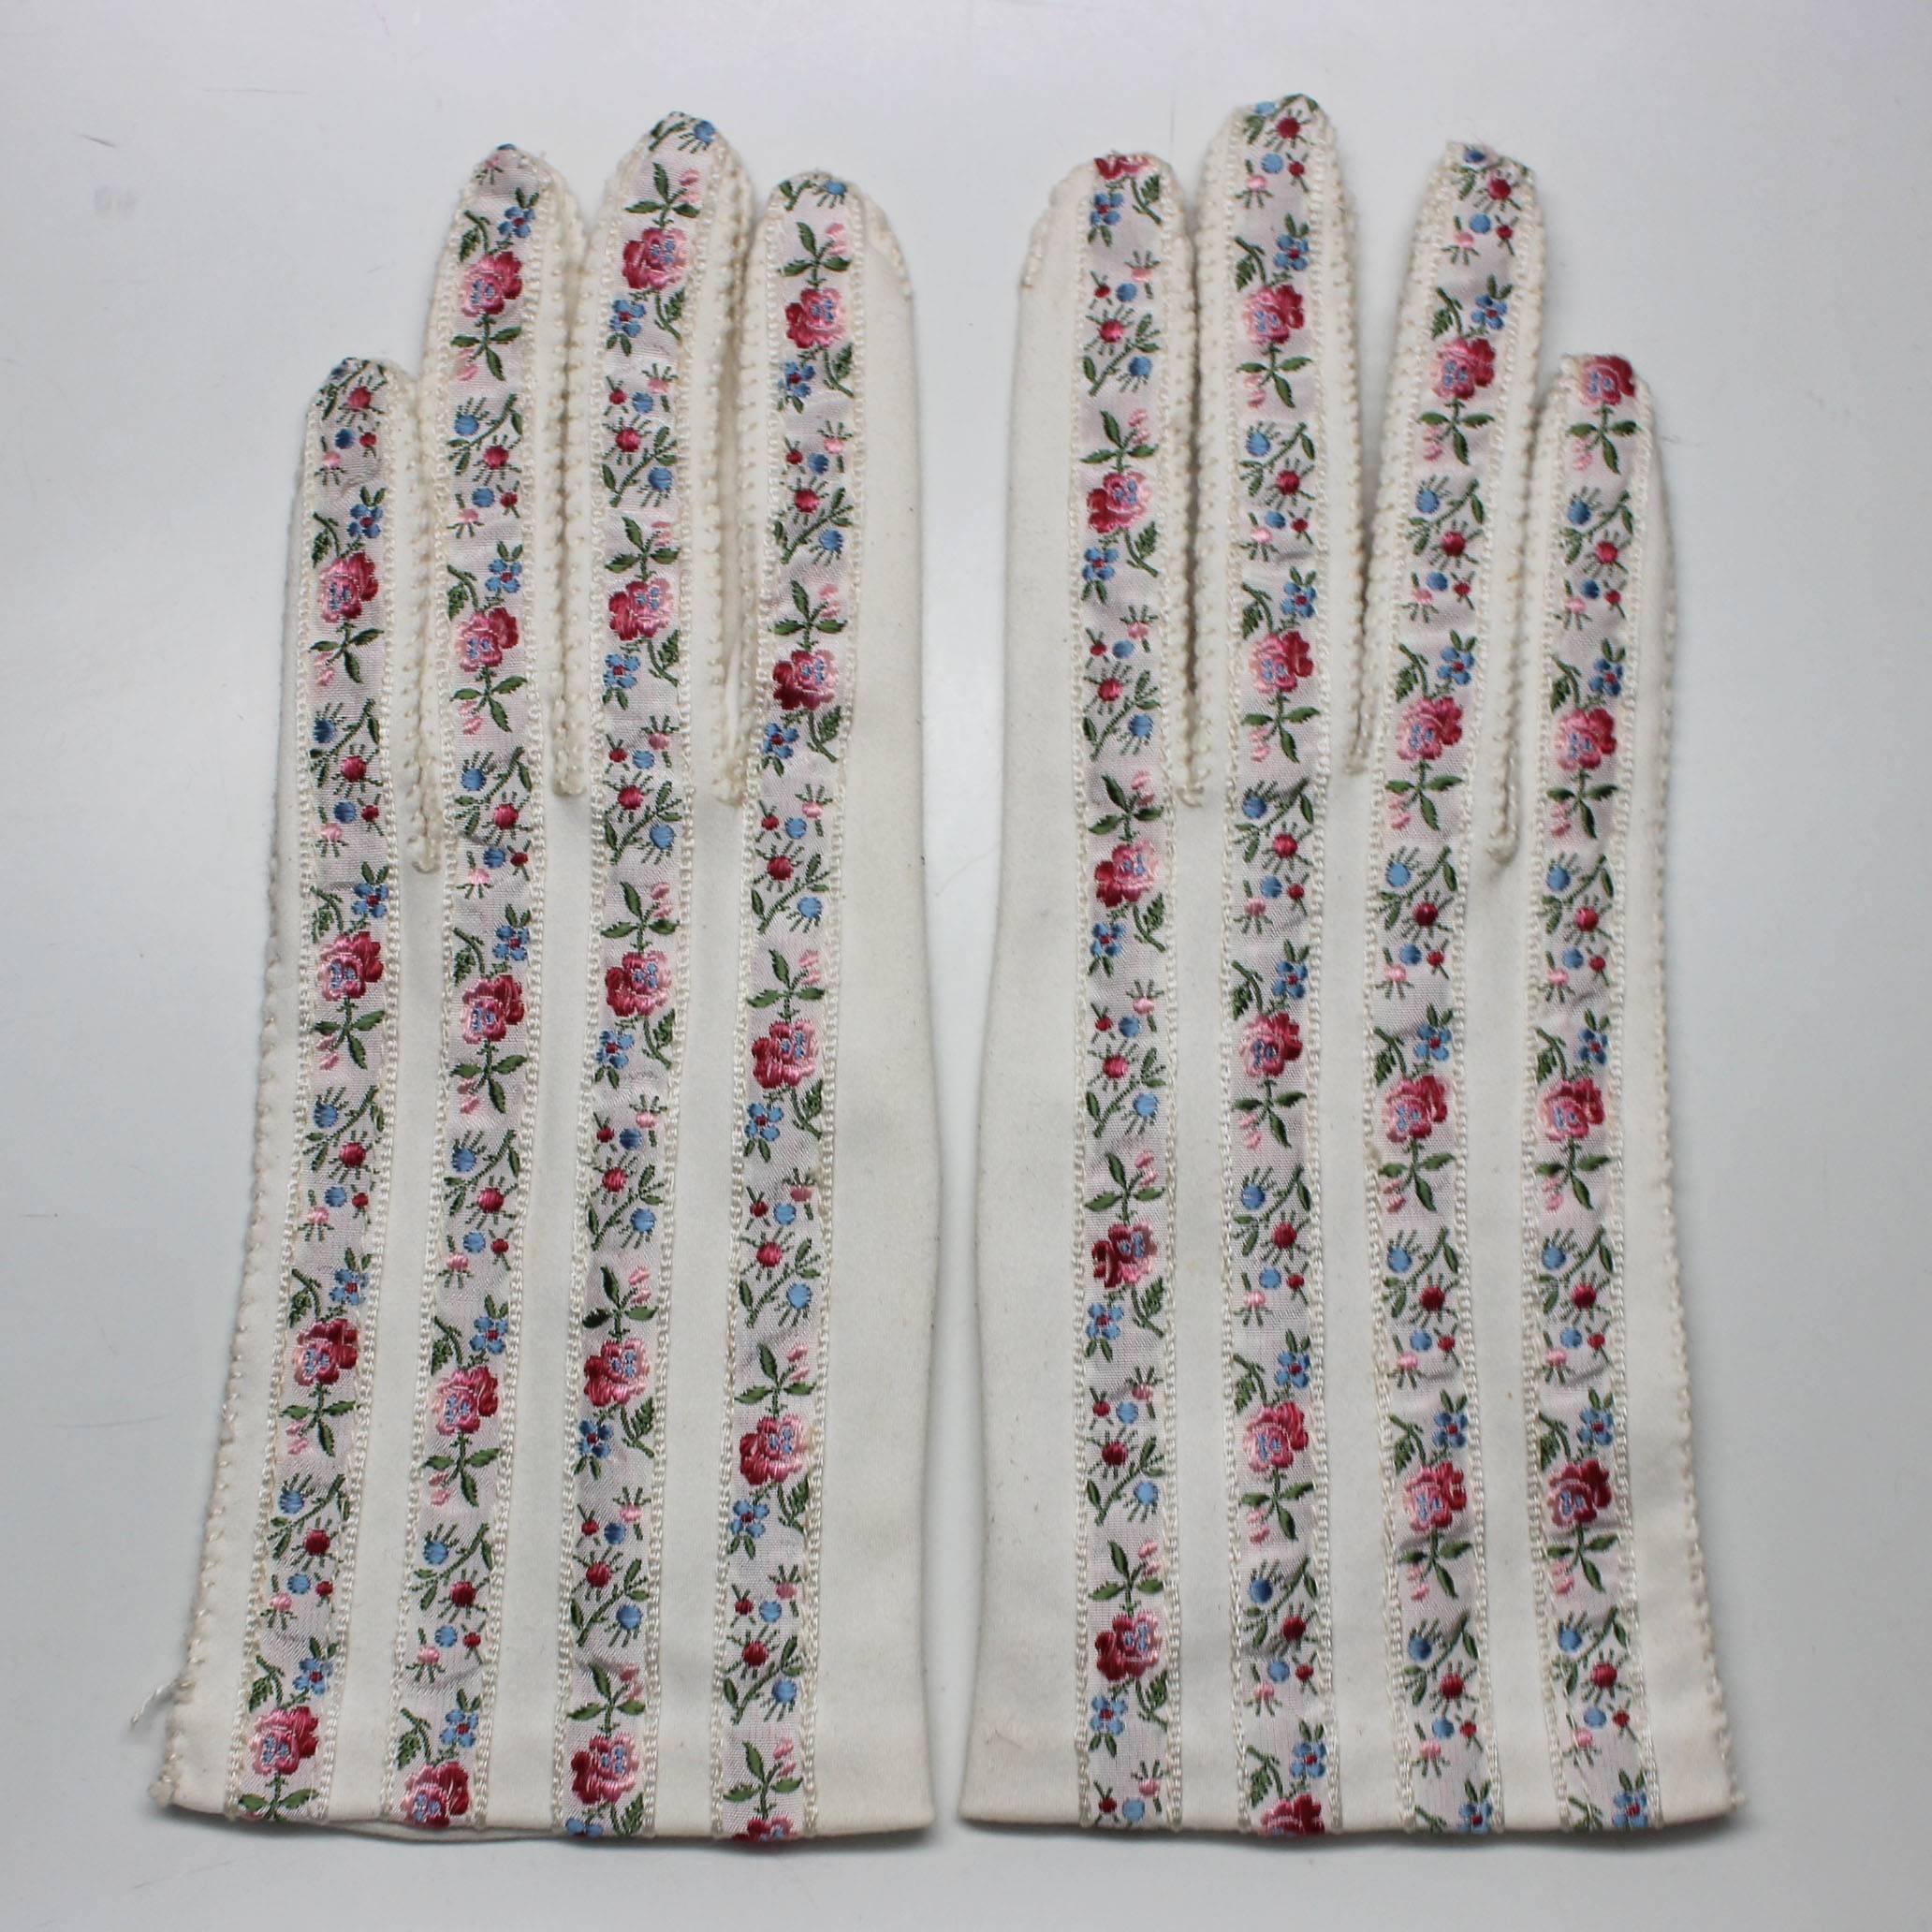 Ombre red/pink and blue/green floral ribbon stitched onto delicate creme cotton gloves. Each finger is hand stitched
Approximate size 6